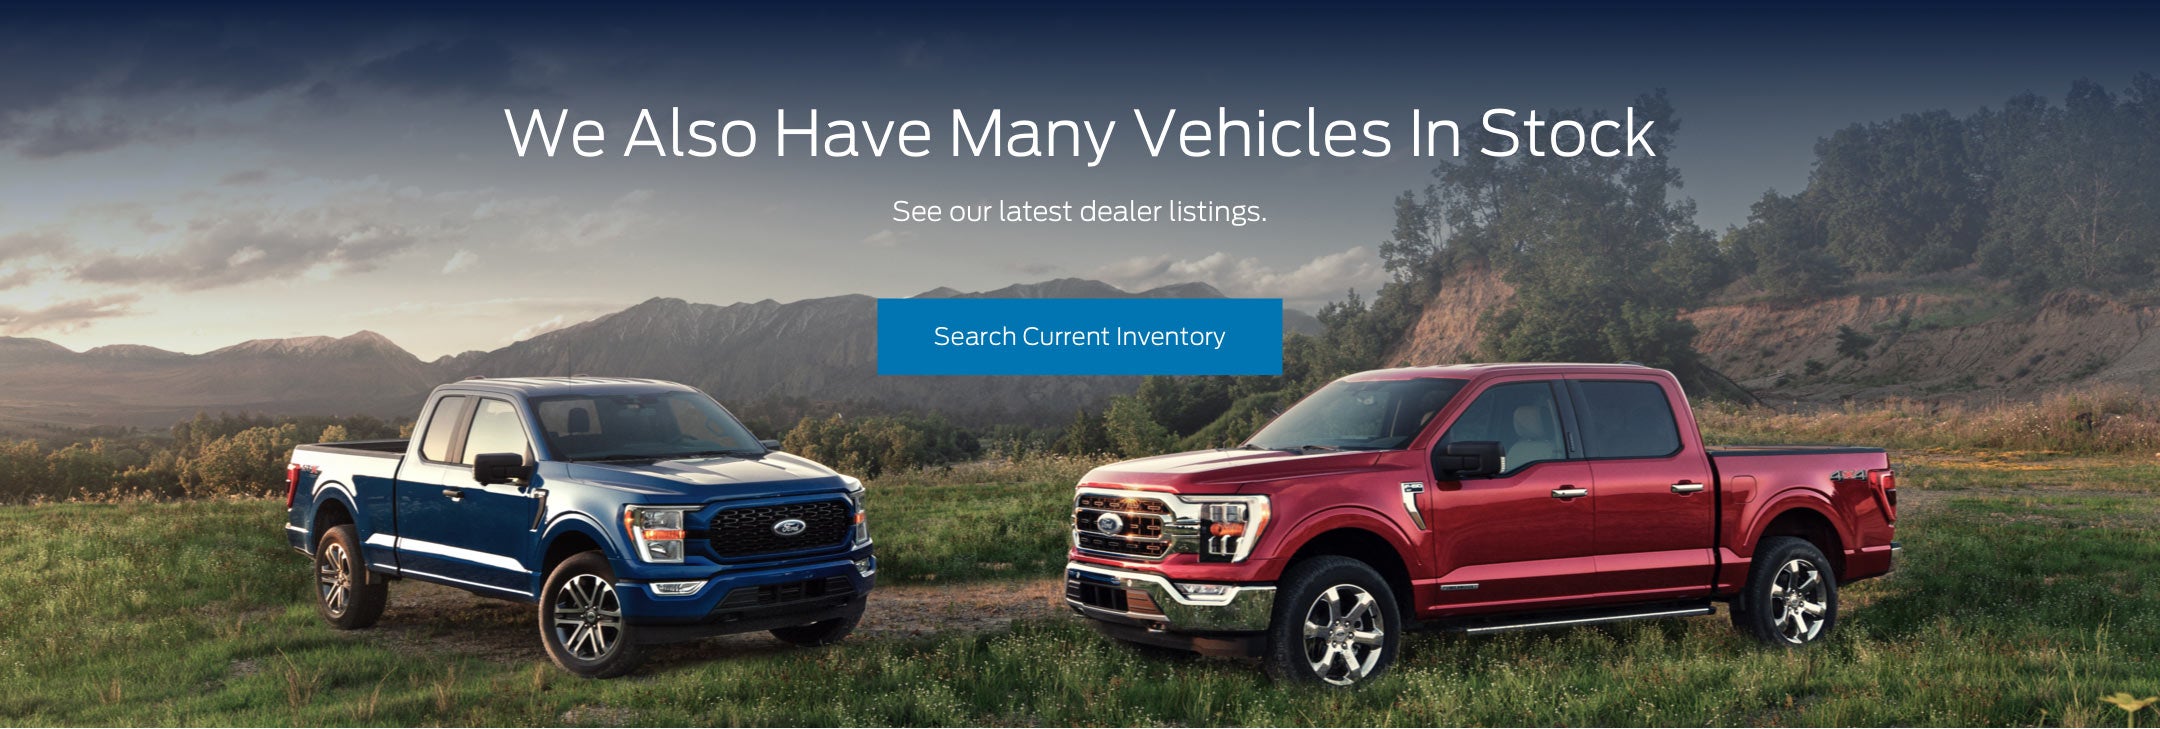 Ford vehicles in stock | Crossroads Ford of Kernersville in Kernersville NC